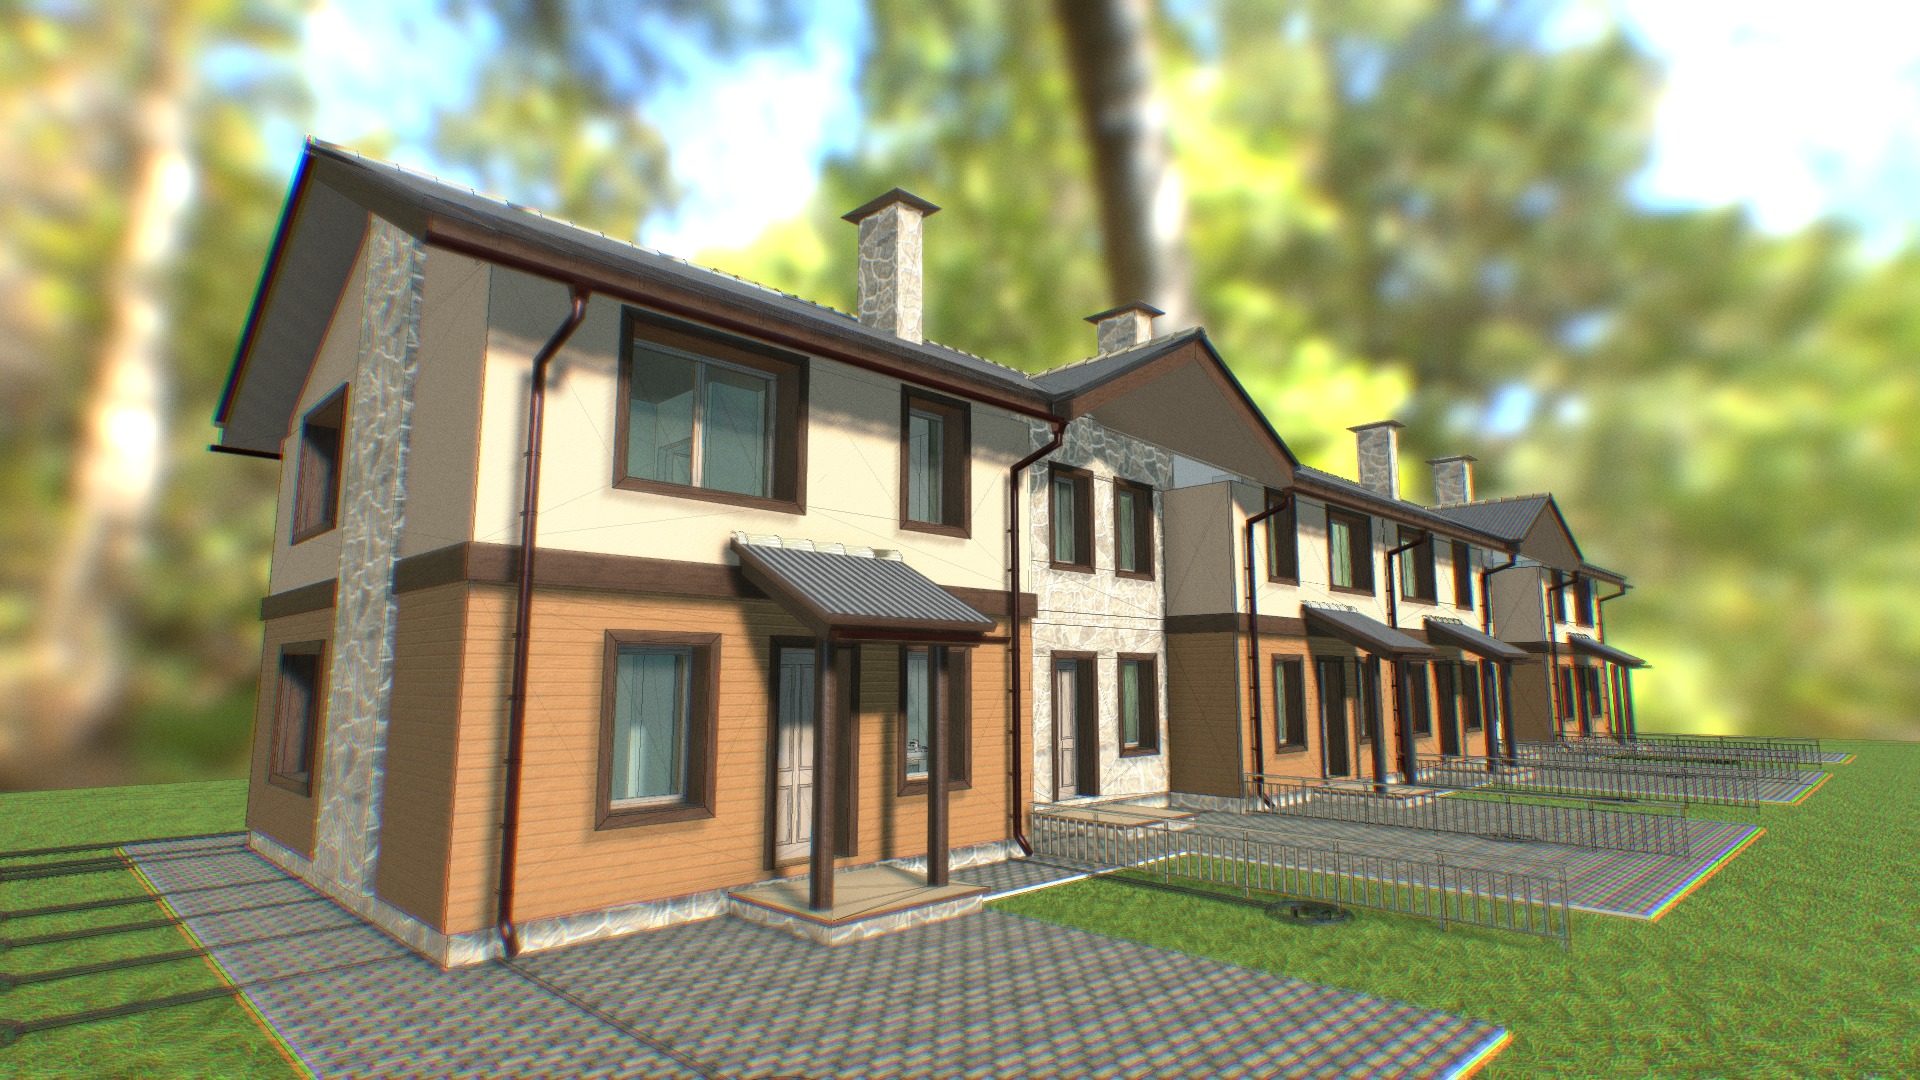 3D model 3D Townhouse 2 - This is a 3D model of the 3D Townhouse 2. The 3D model is about a house with a driveway.